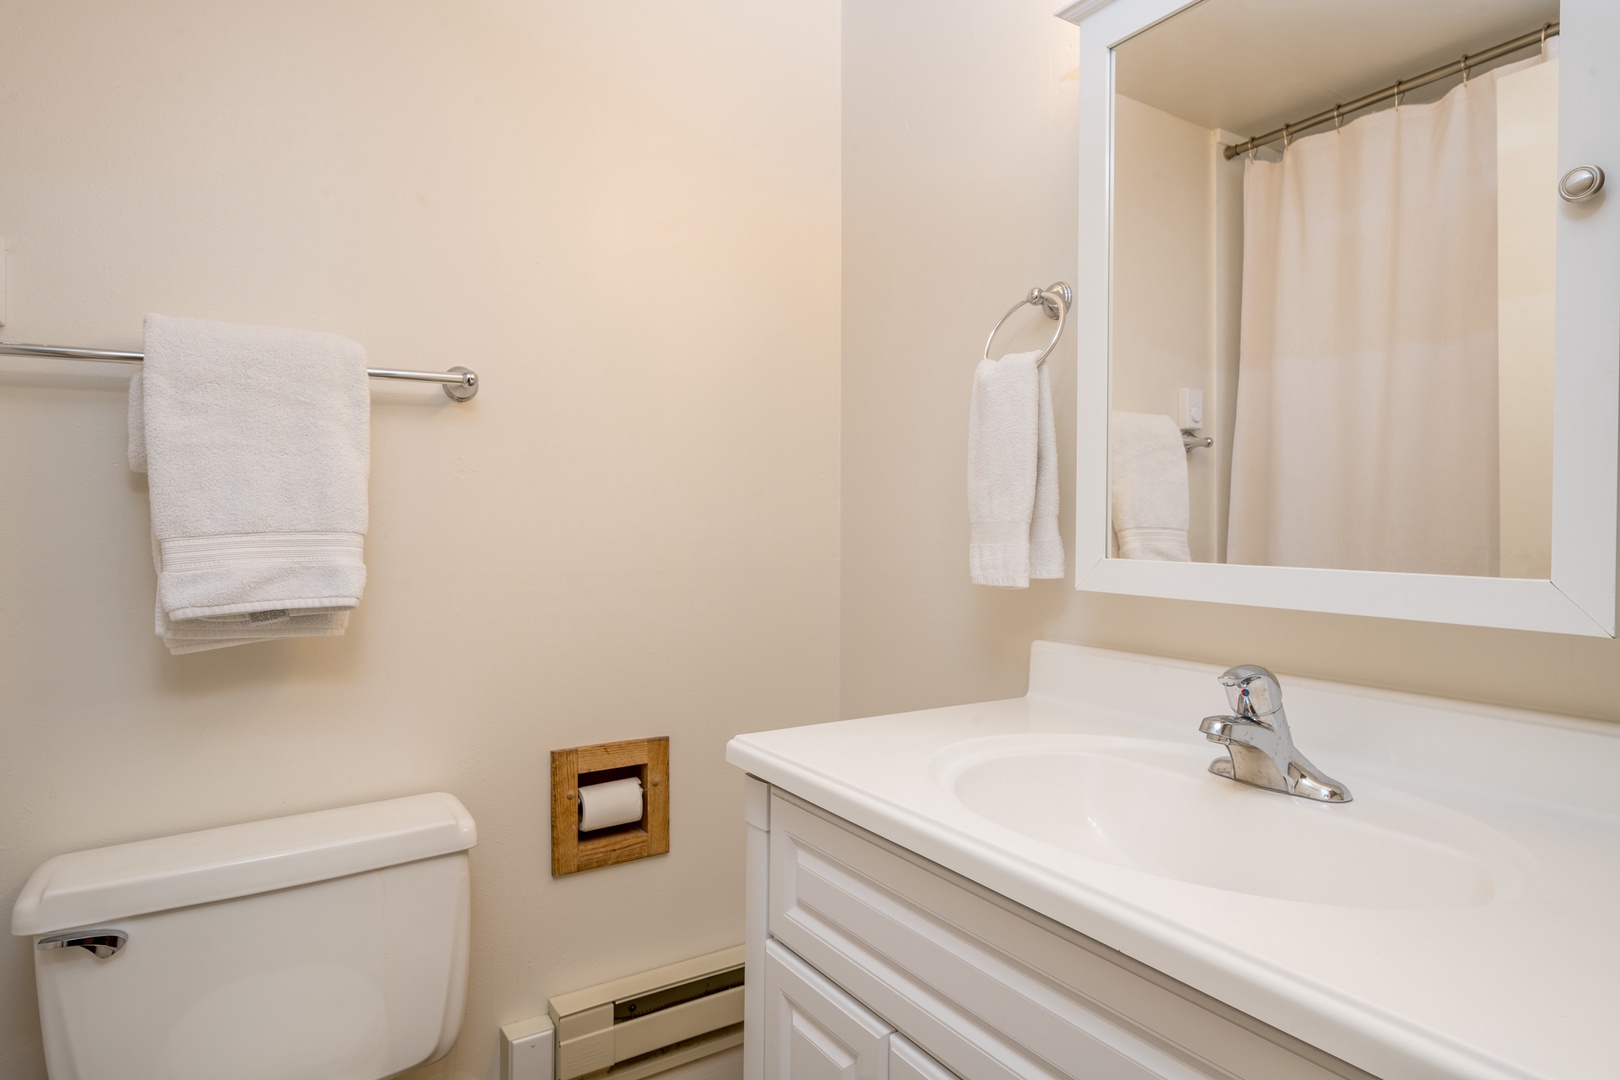 Ketchum Vacation Rentals, Bavarian Warm Springs Charm - Two bathrooms for guests